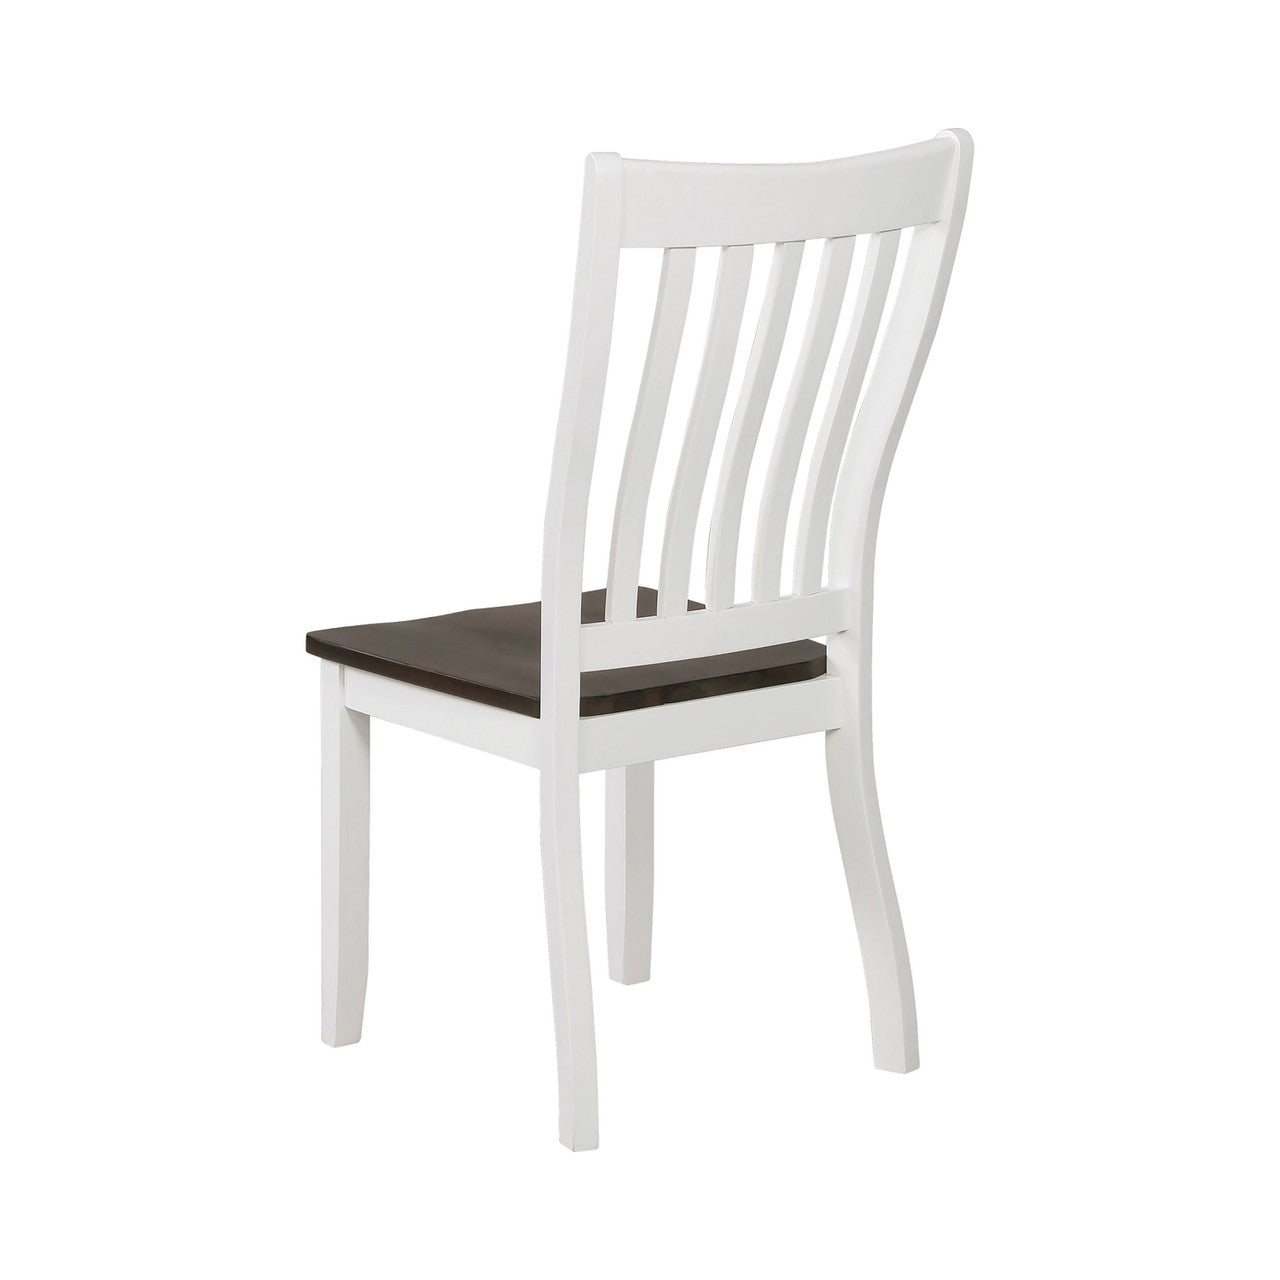 Kingman Slat Back Dining Chairs Espresso And White (Set Of 2)